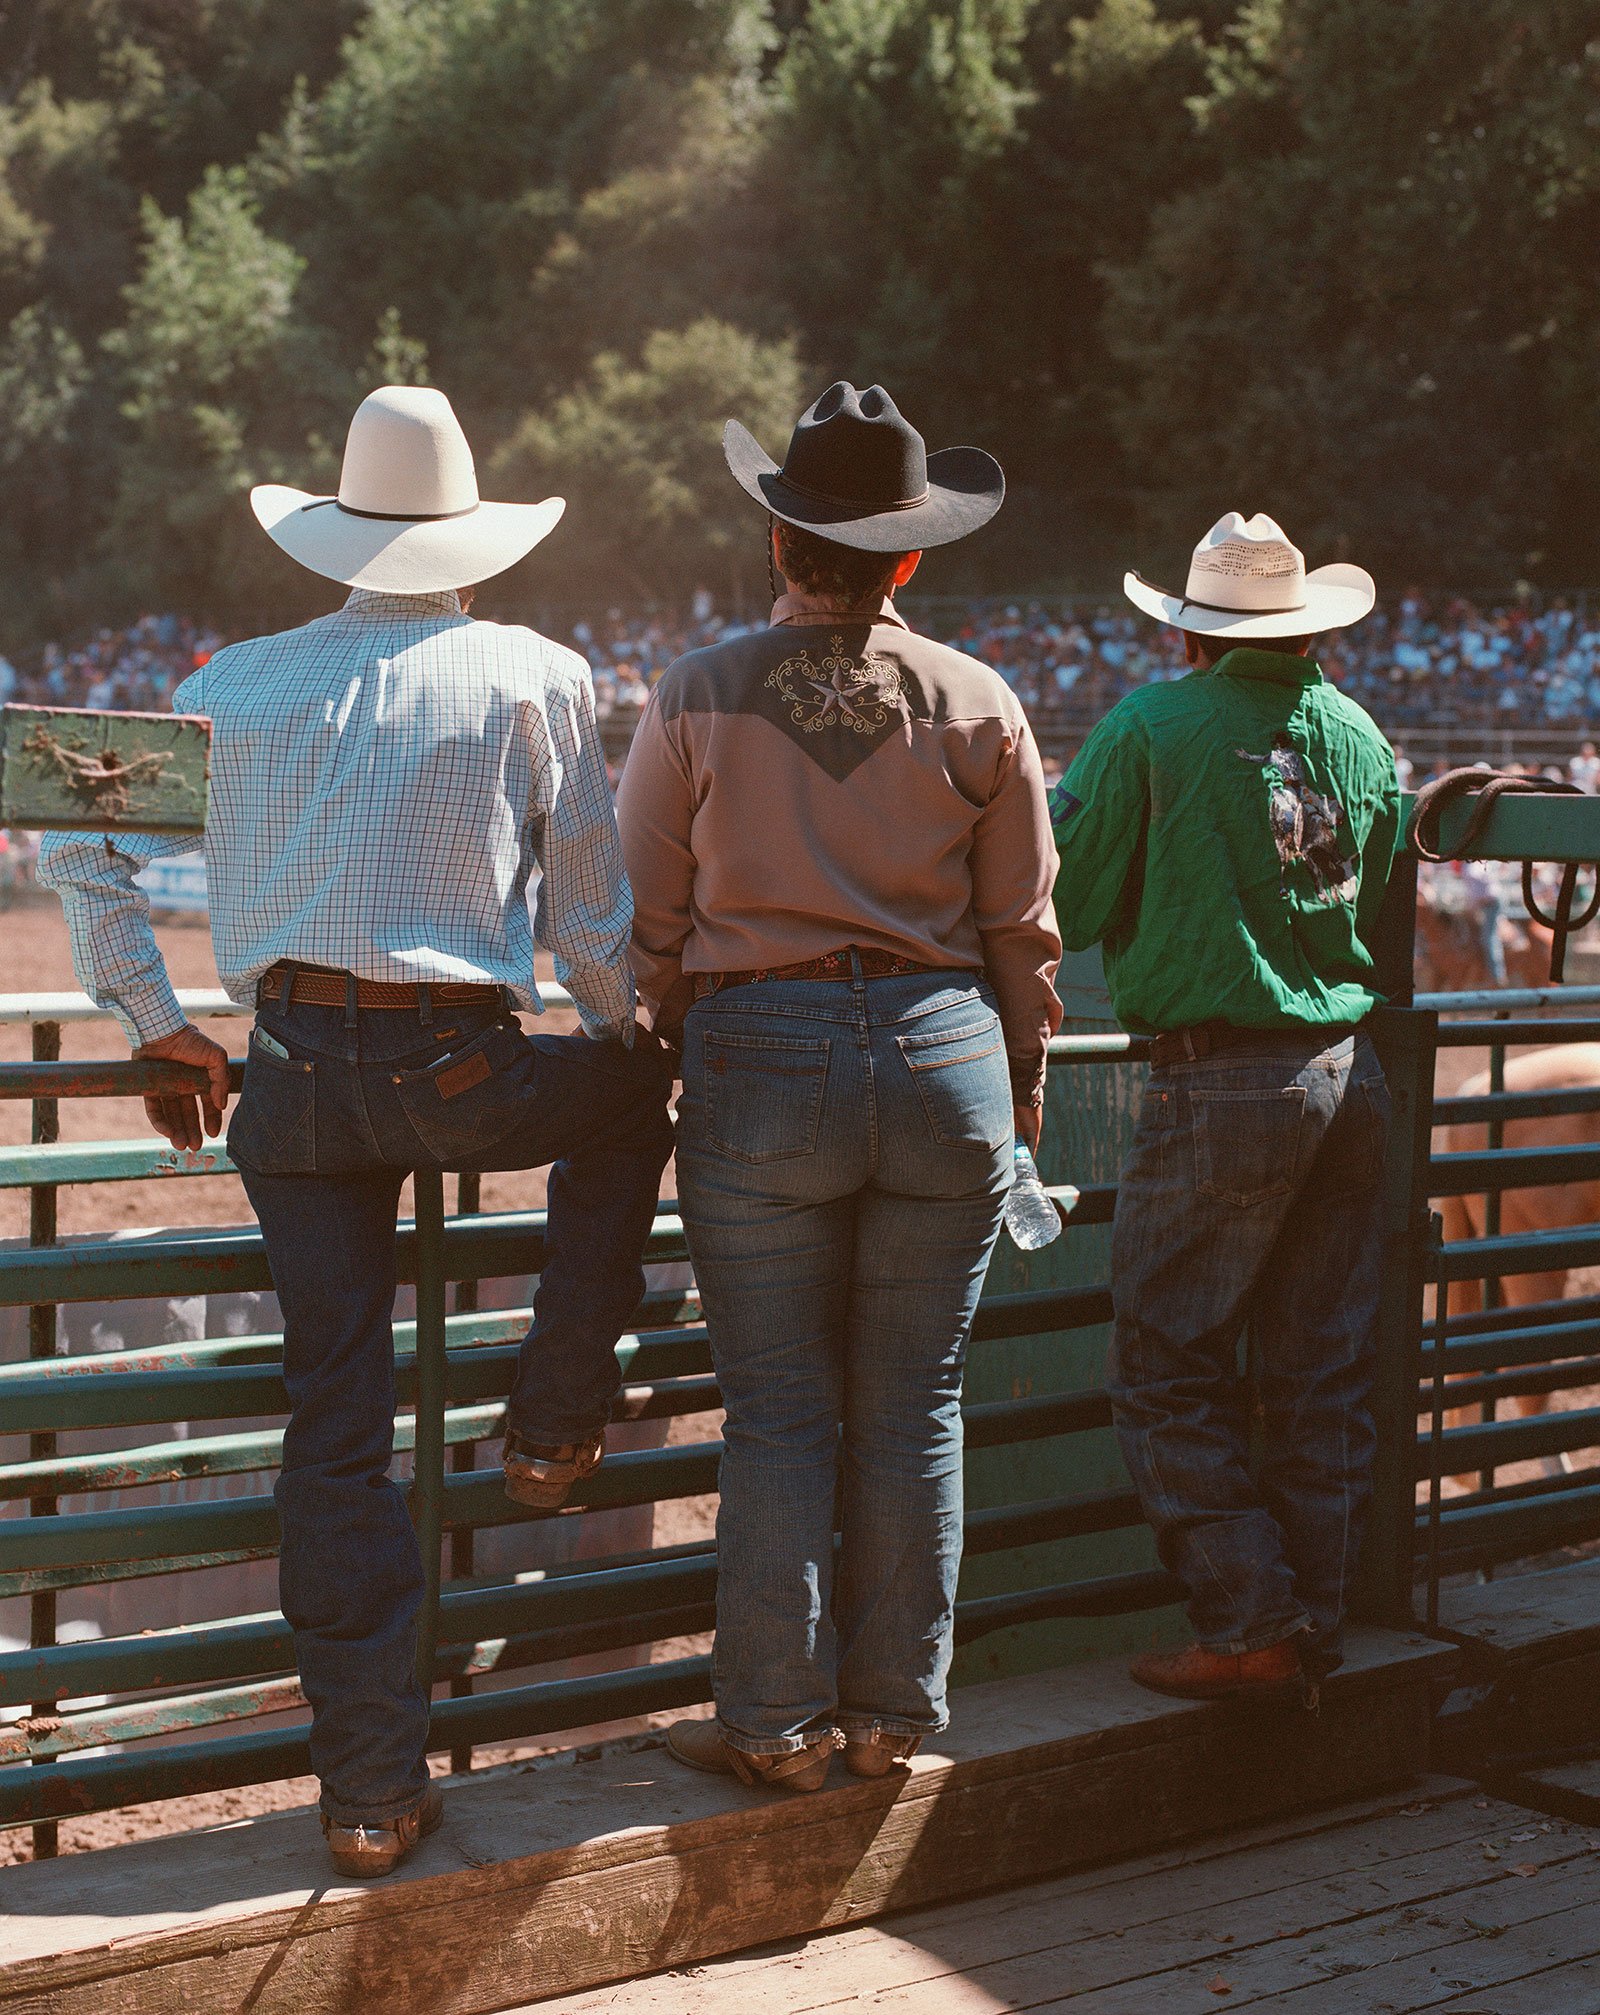 cowboys watching a rodeo from the other side of the fence